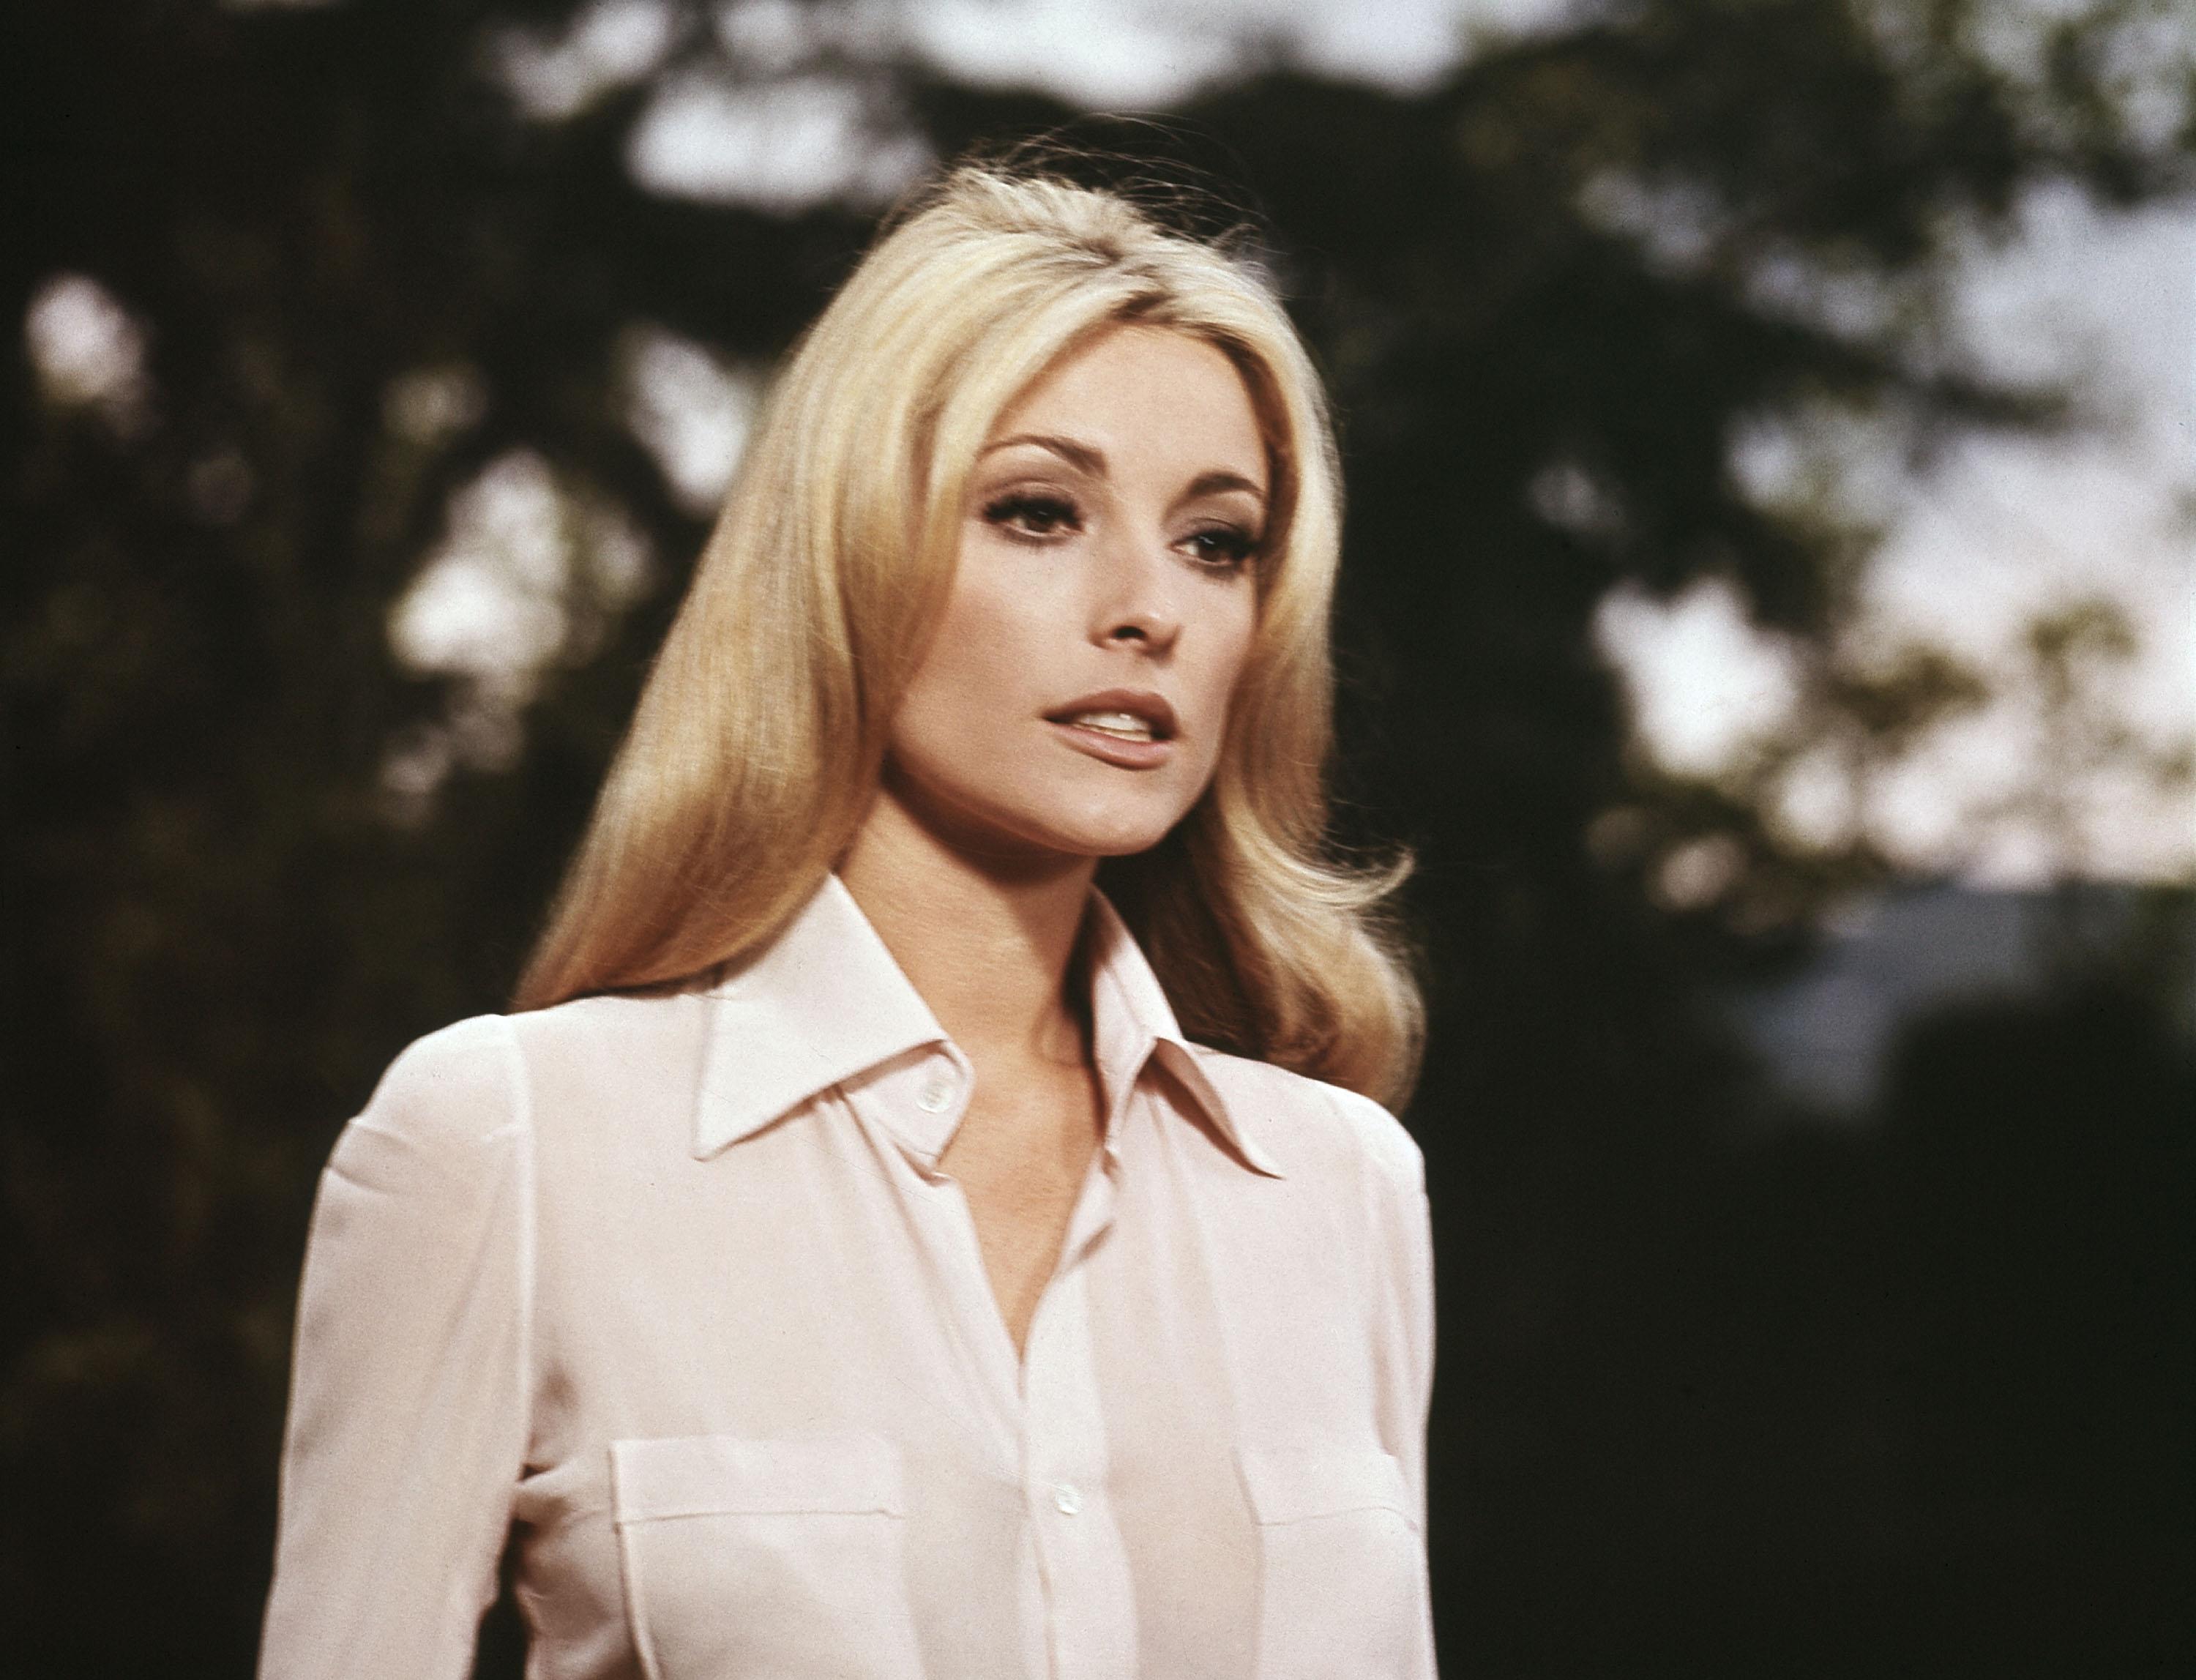 Sharon Tate's wedding dress sold at auction in LA